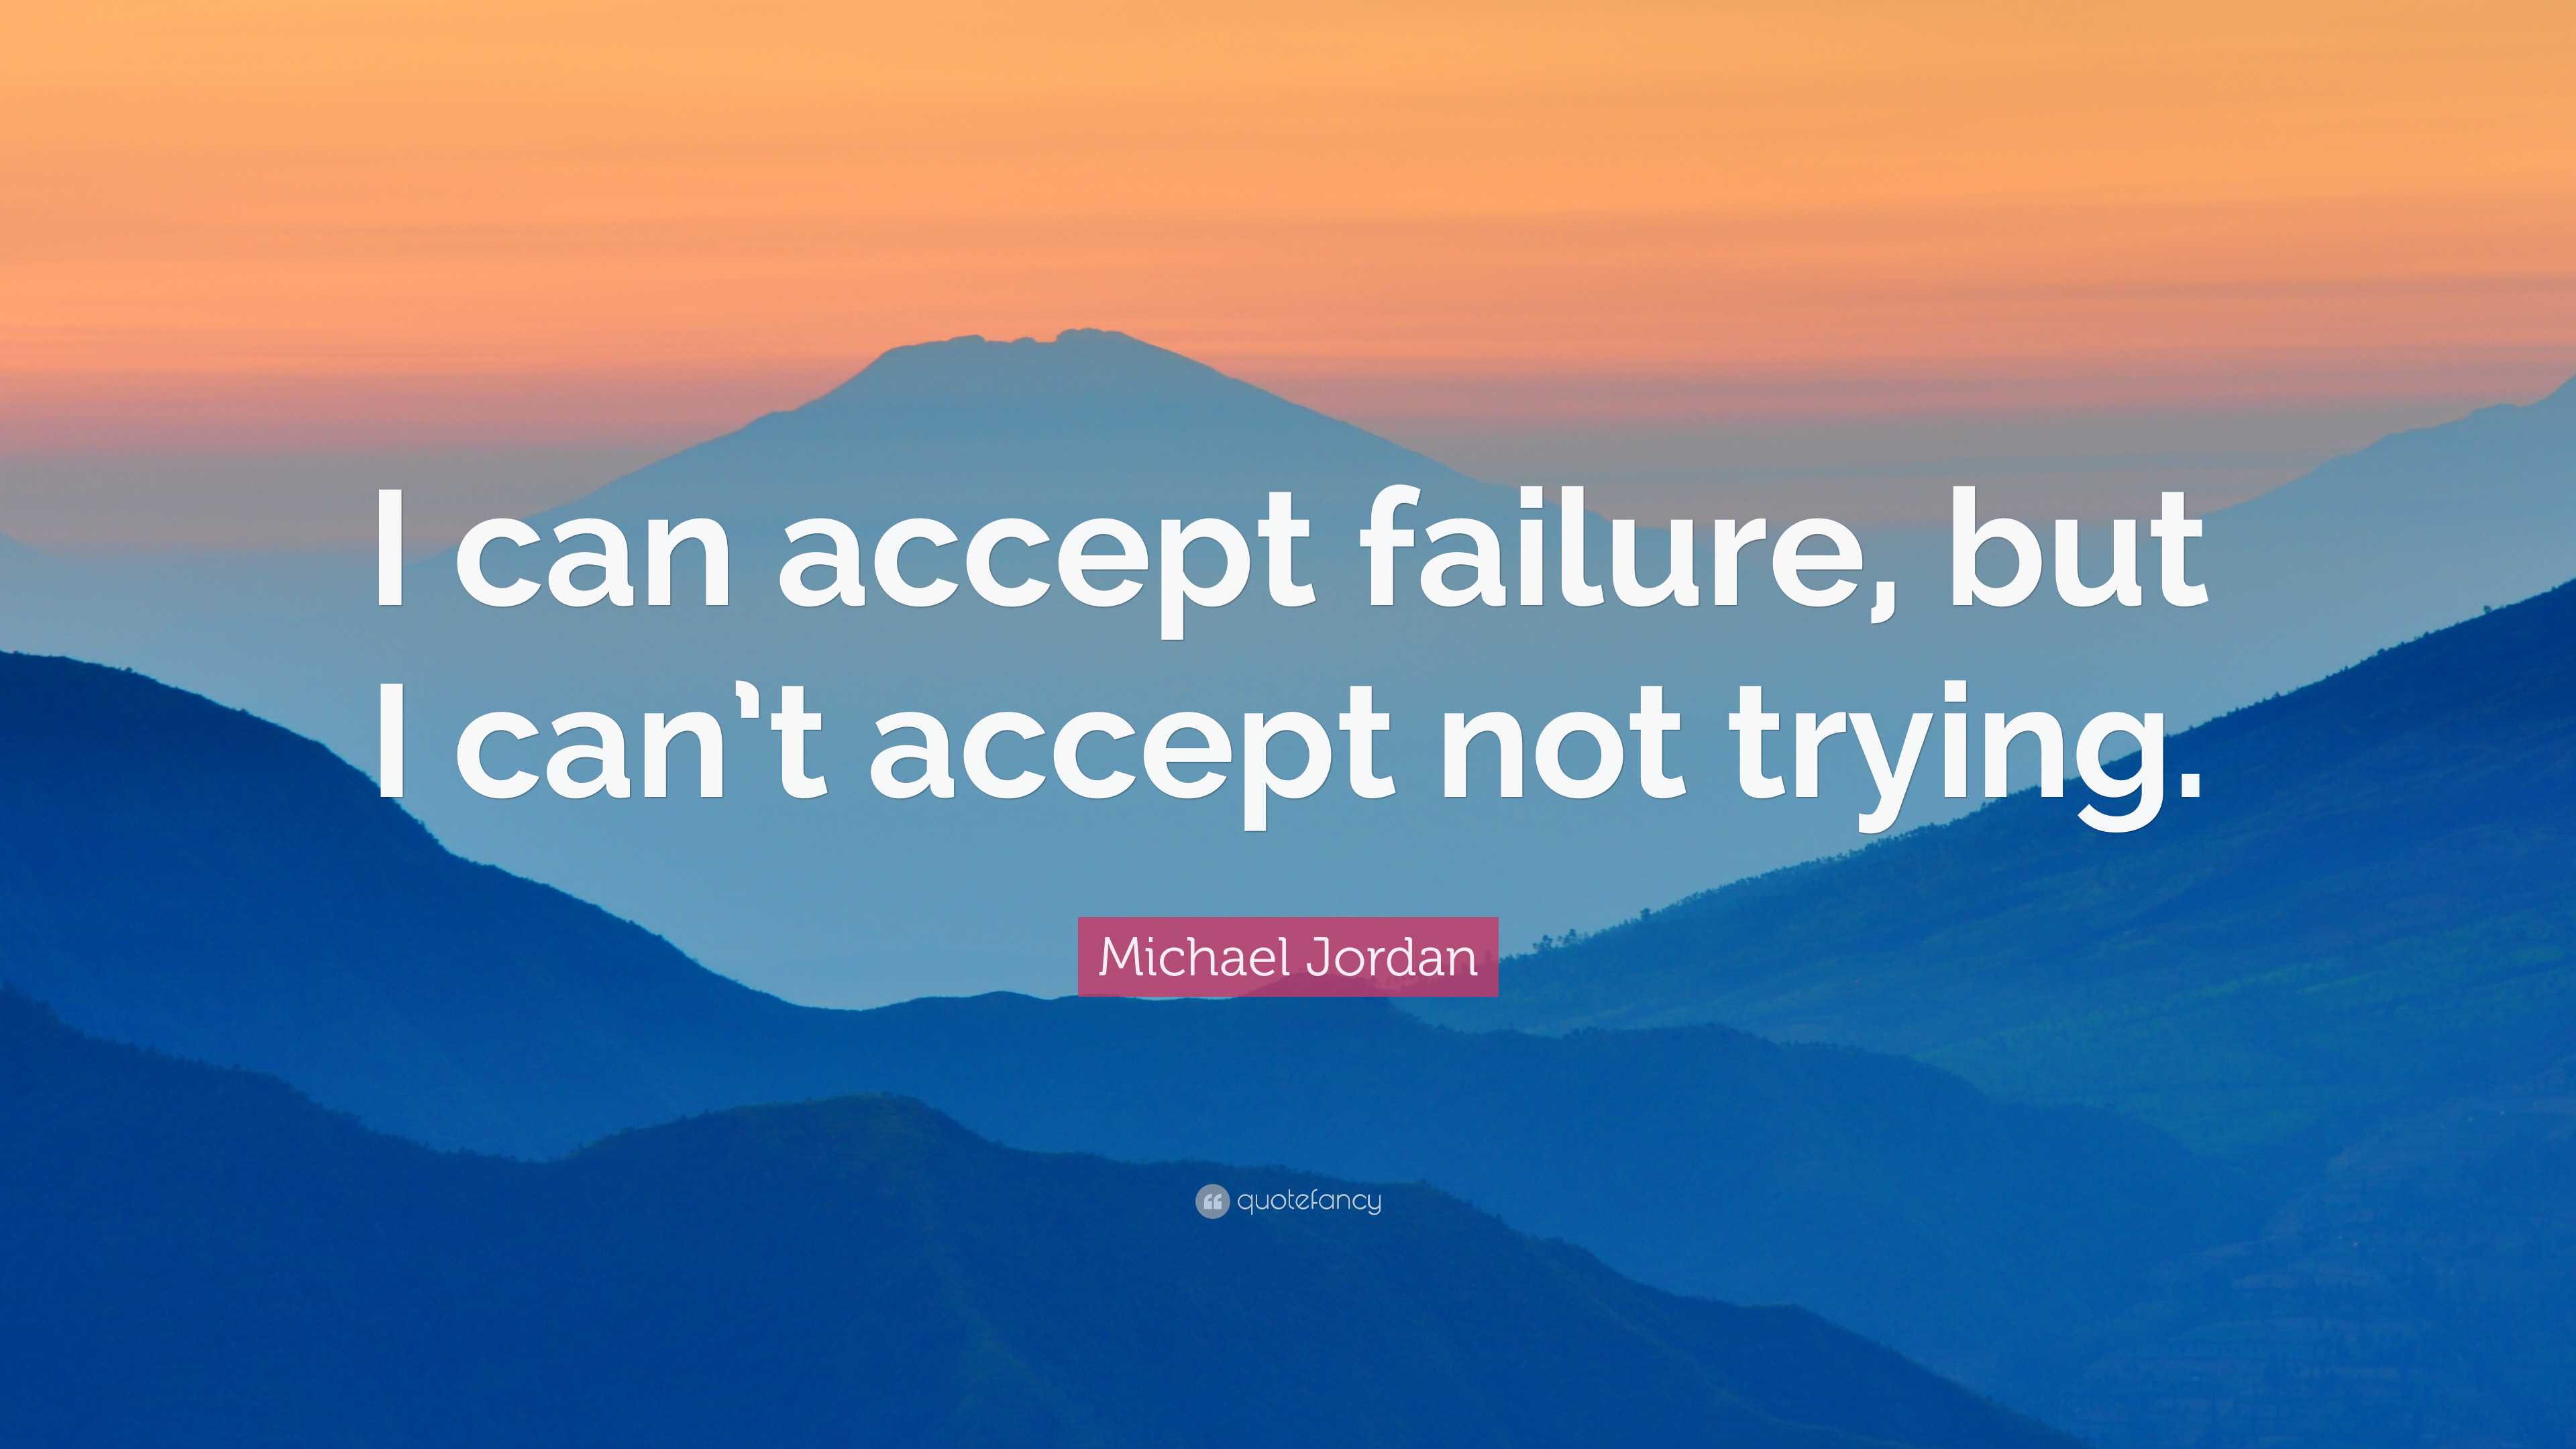 Michael Jordan Quote: “I can accept failure, but I can’t accept not ...